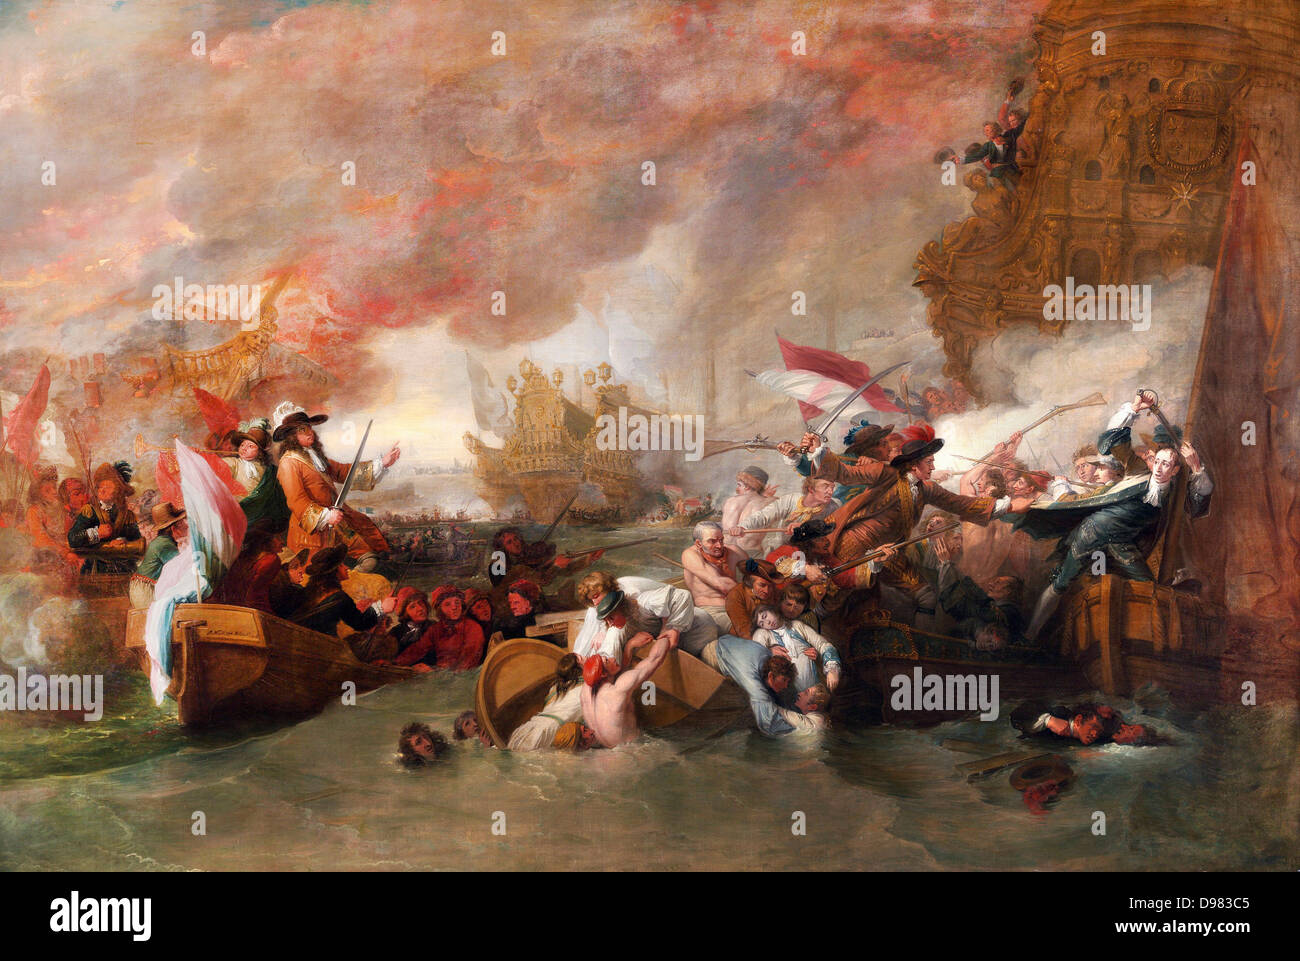 Benjamin West, The Battle of La Hogue 1778 Oil on canvas. Yale Center for British Art, New Haven, Connecticut, USA. Stock Photo